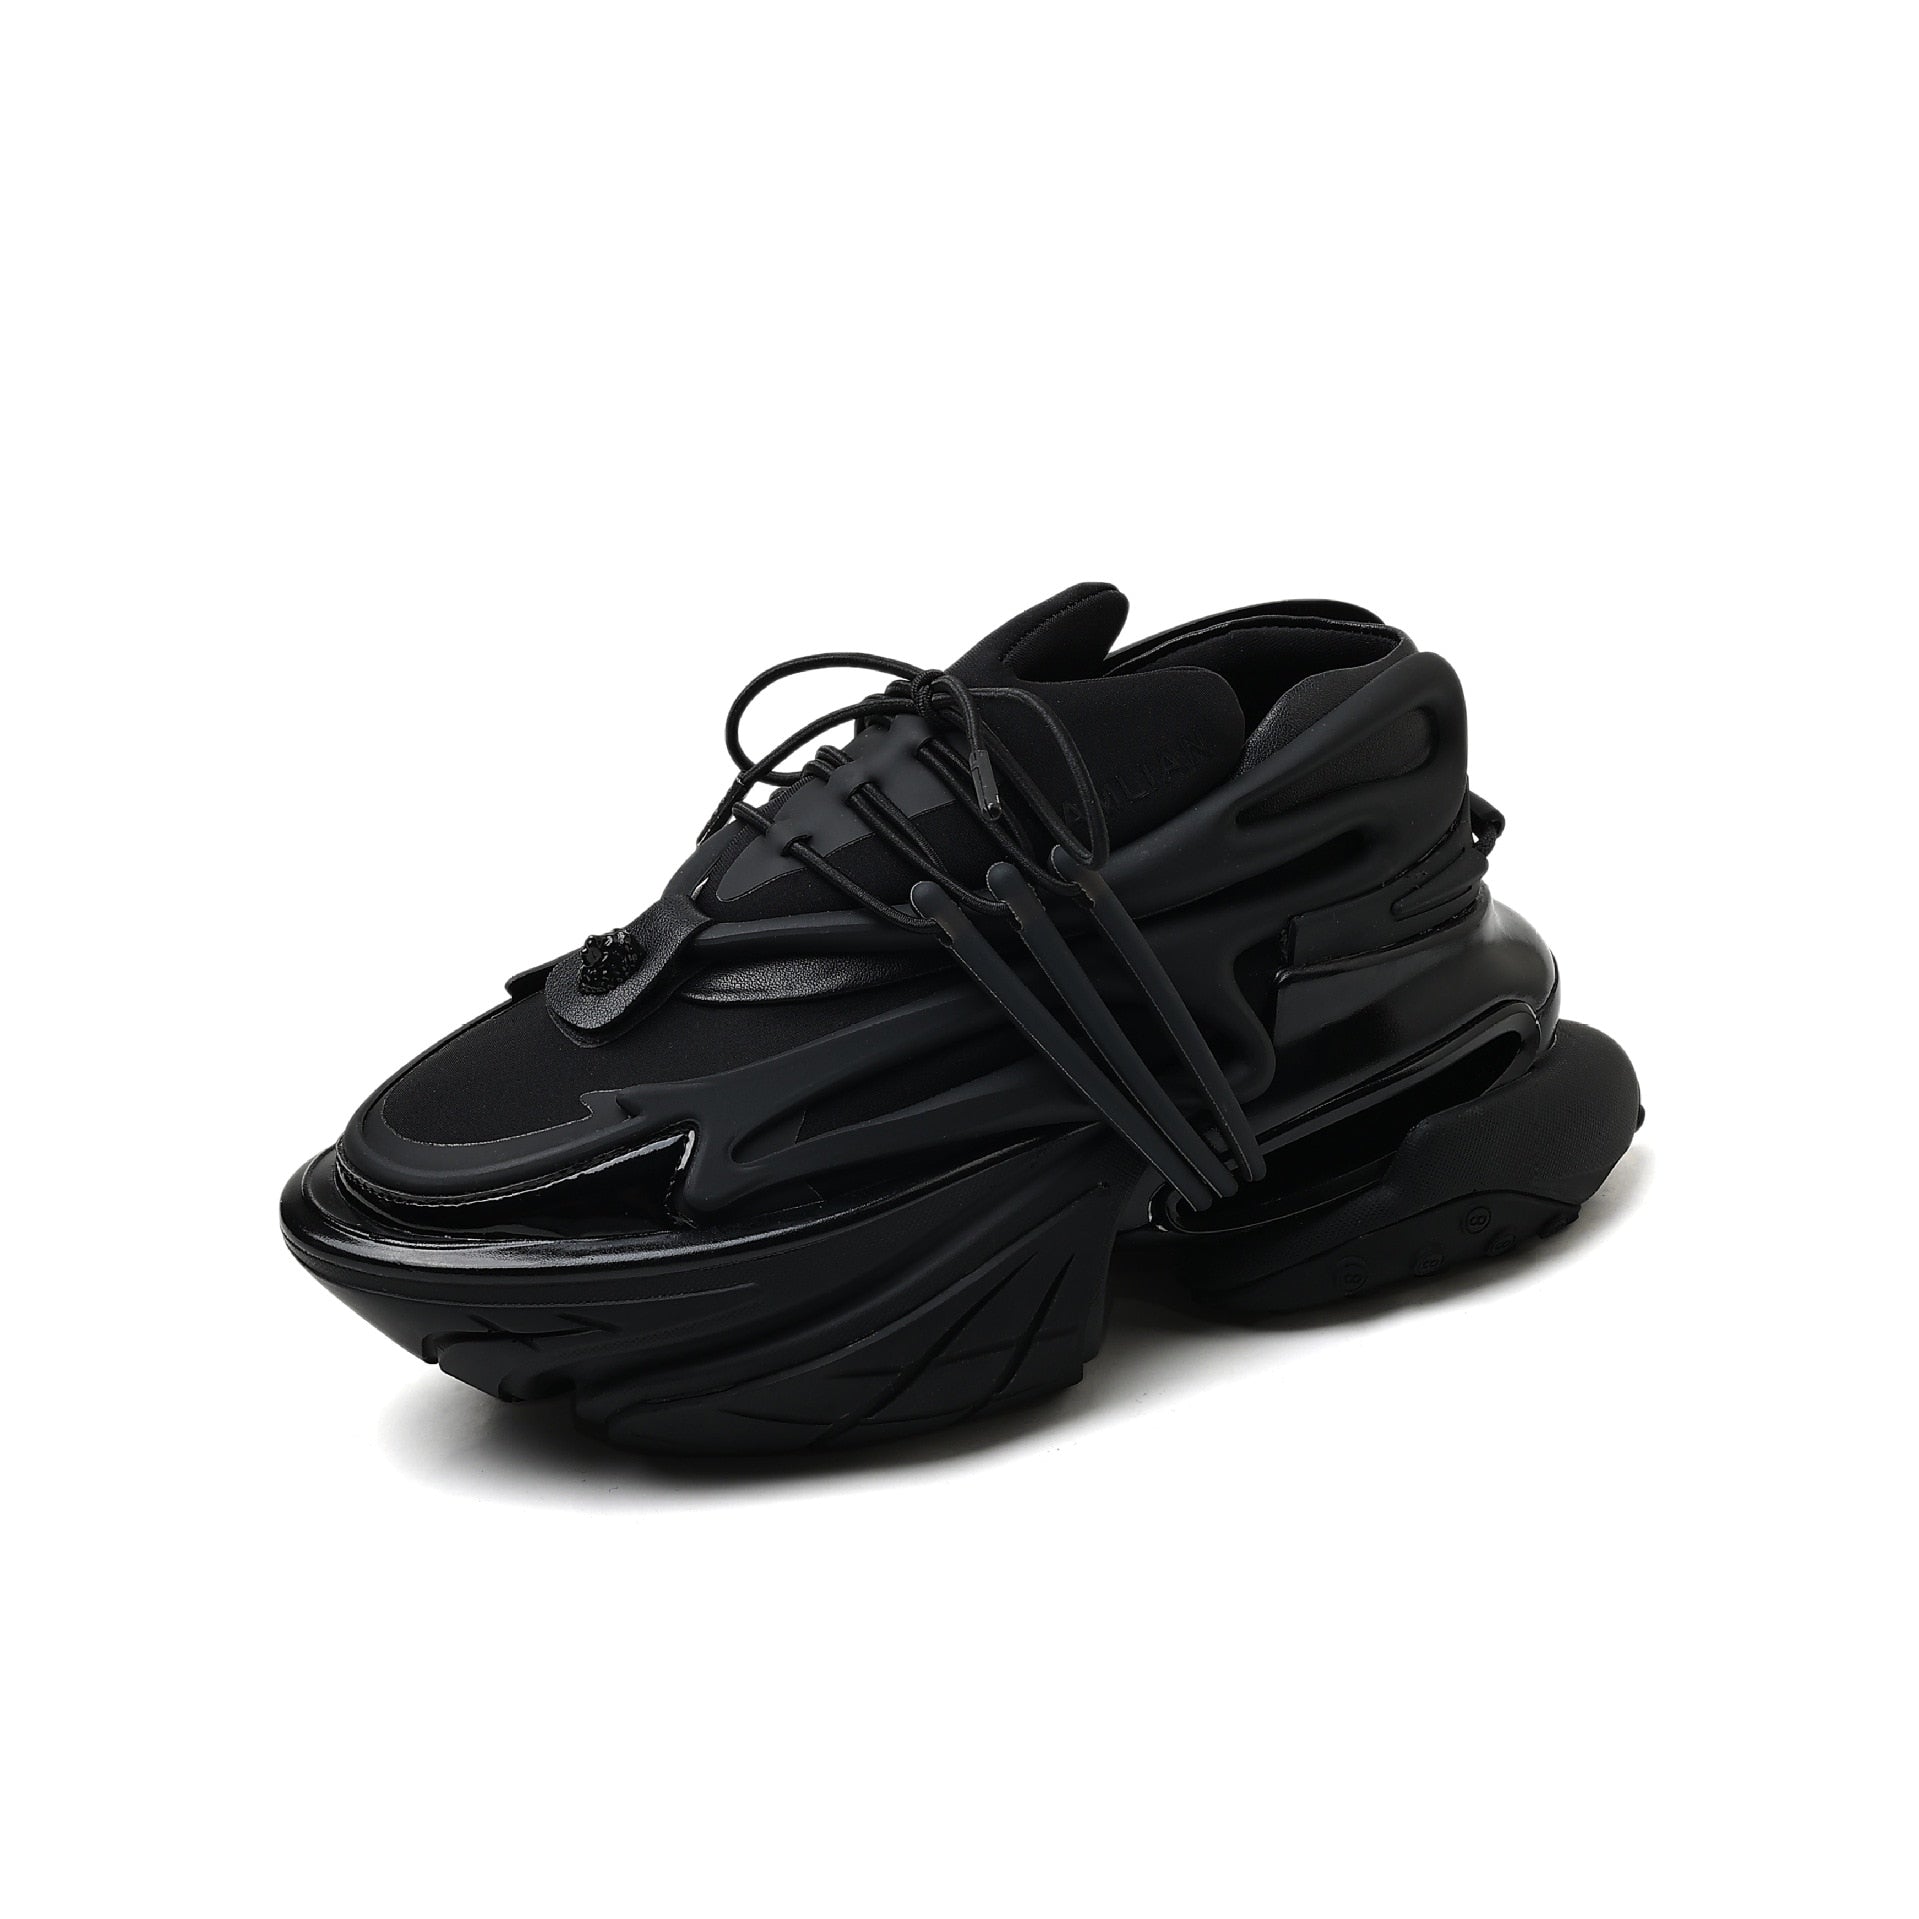 Spaceship Comfortable Airbag Shoes